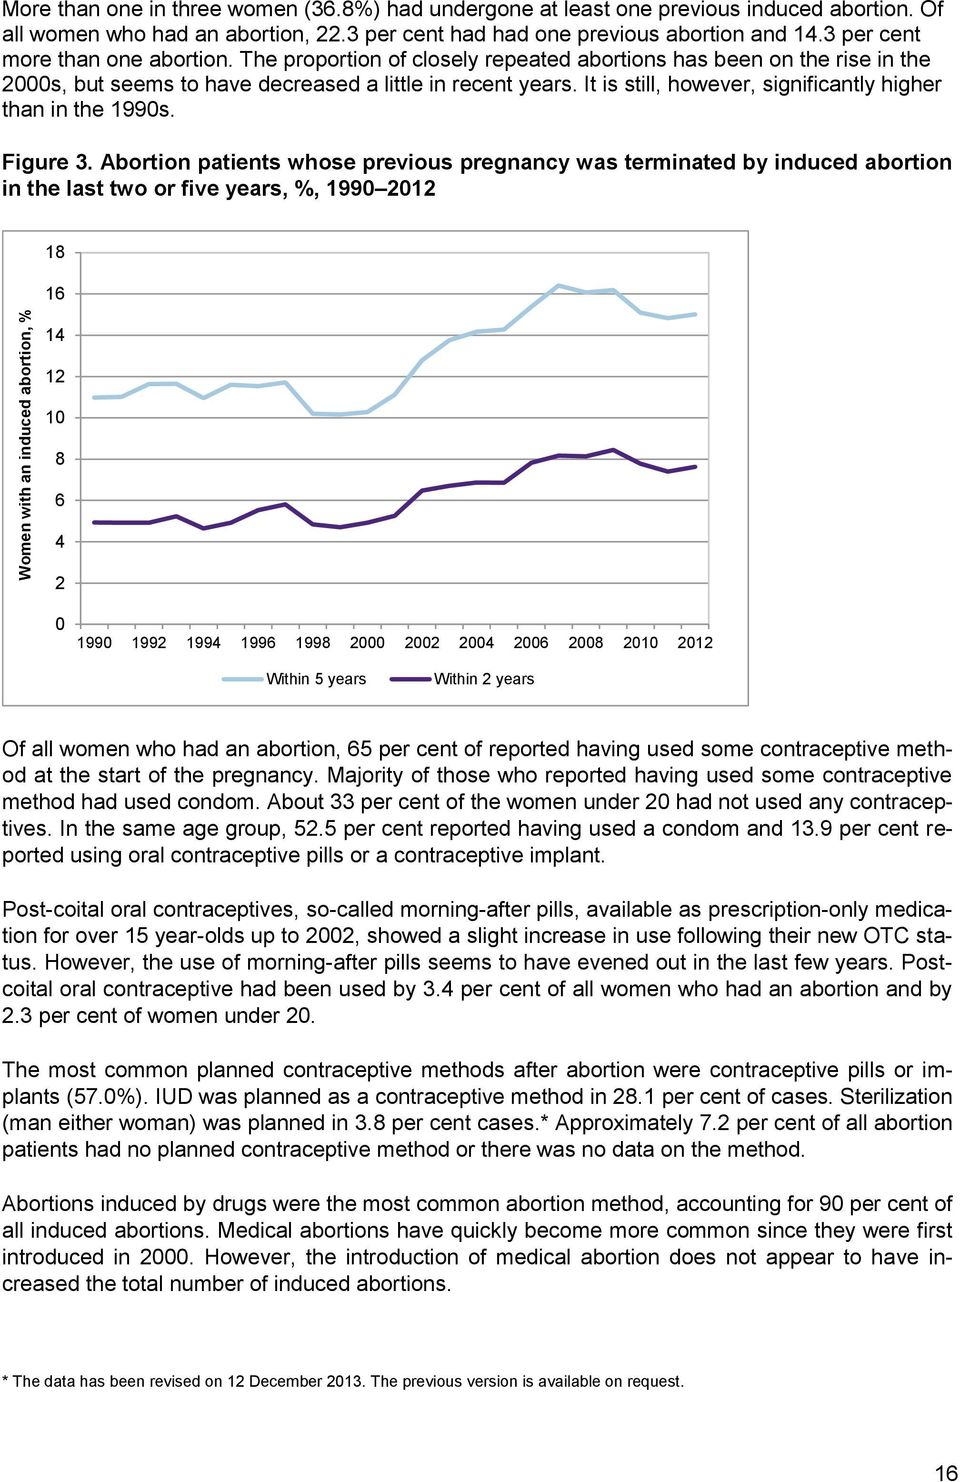 The proportion of closely repeated abortions has been on the rise in the 2000s, but seems to have decreased a little in recent years. It is still, however, significantly higher than in the 1990s.